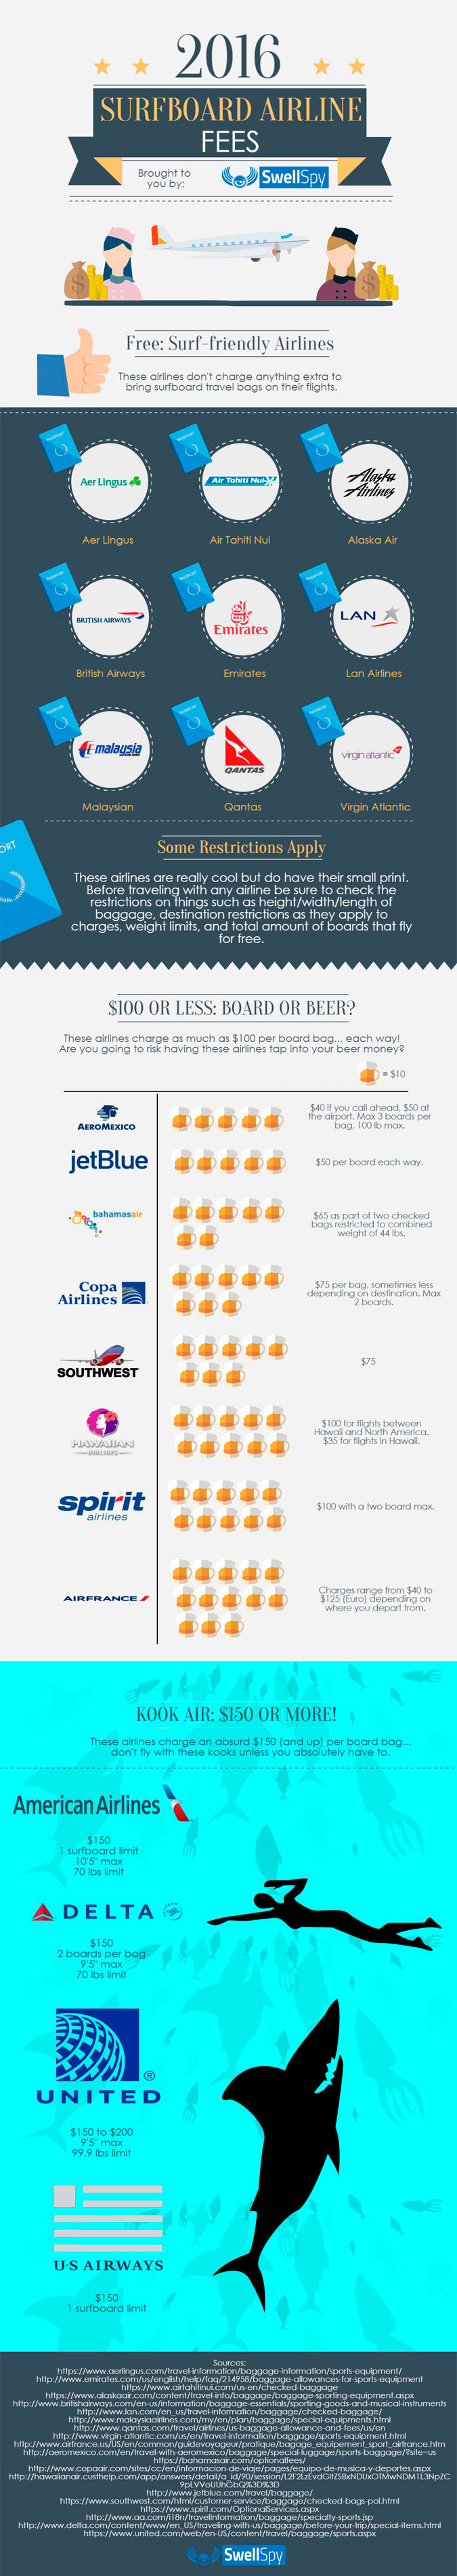 Infographic Analyzes 21 Airline Surfboard Fees The Inertia